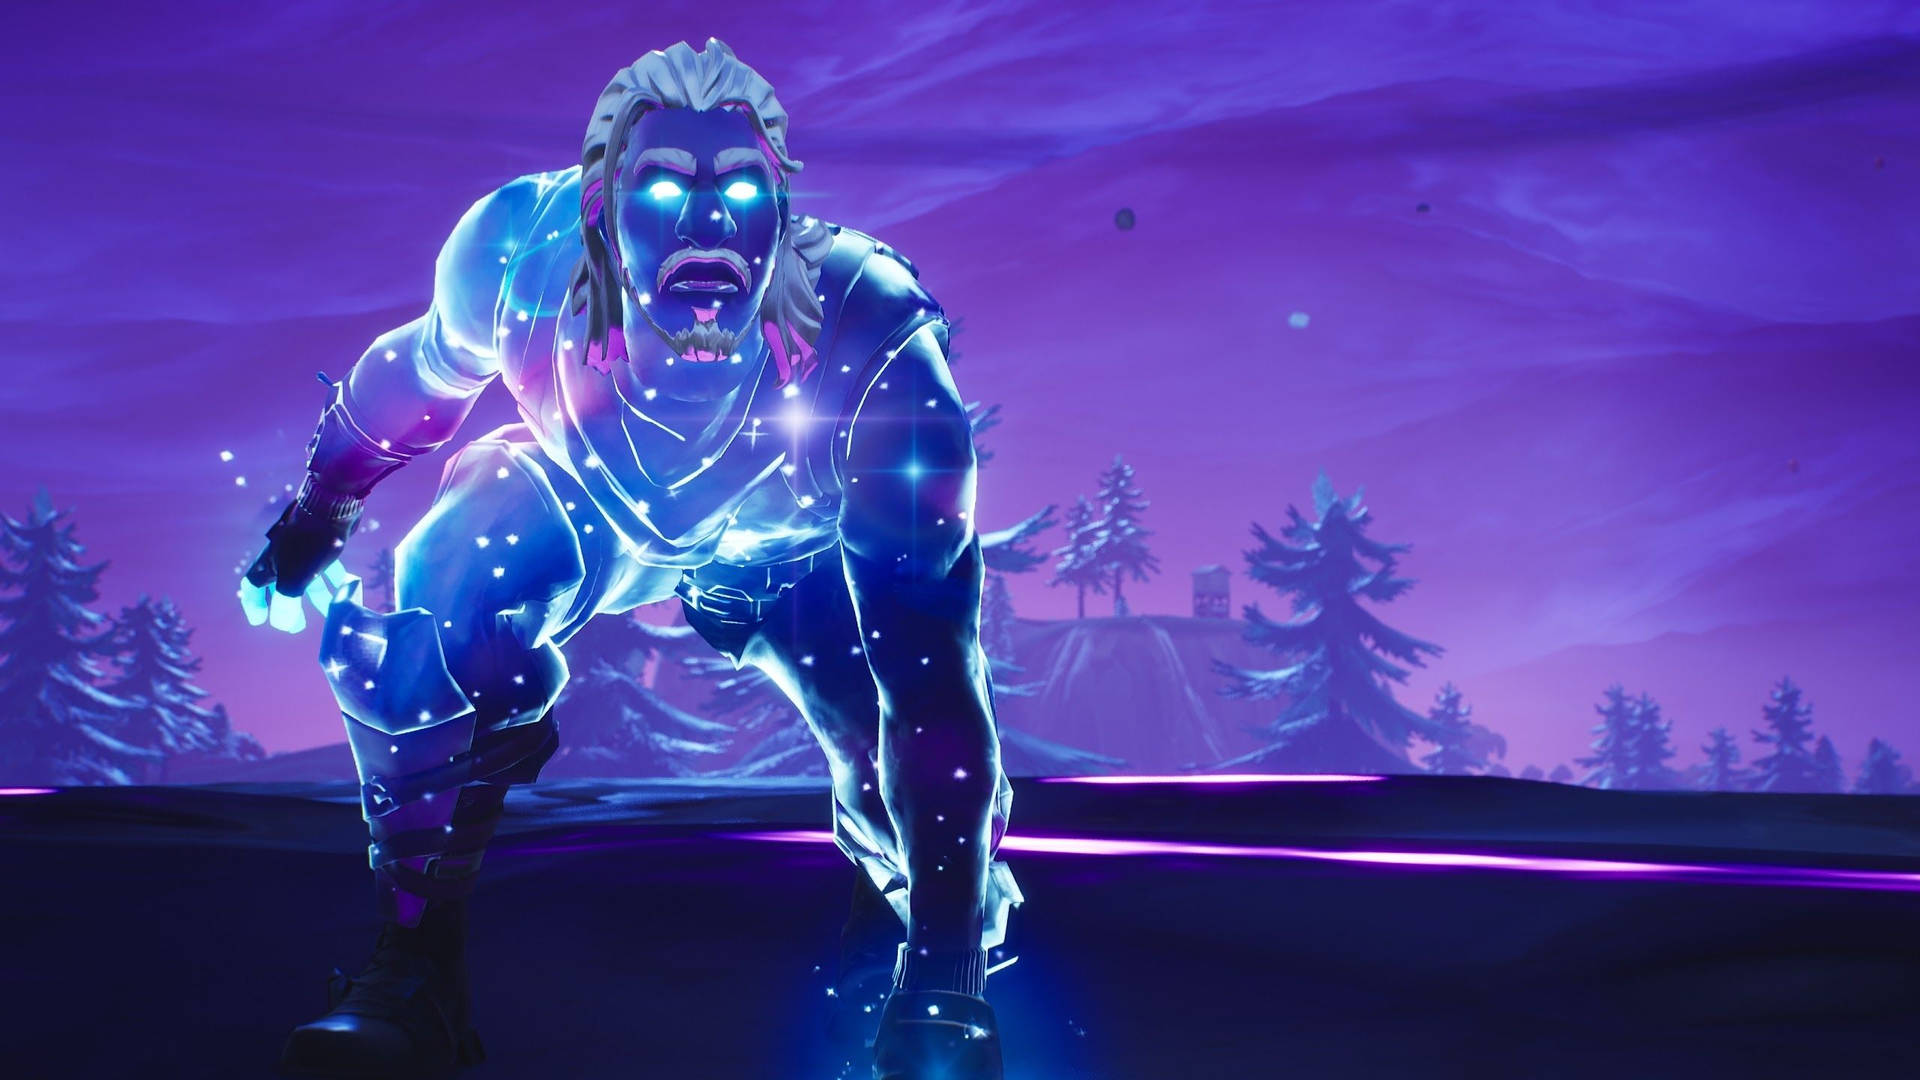 Fortnite Galaxy Skin in Action on a 2560x1440 Wallpaper Wallpaper